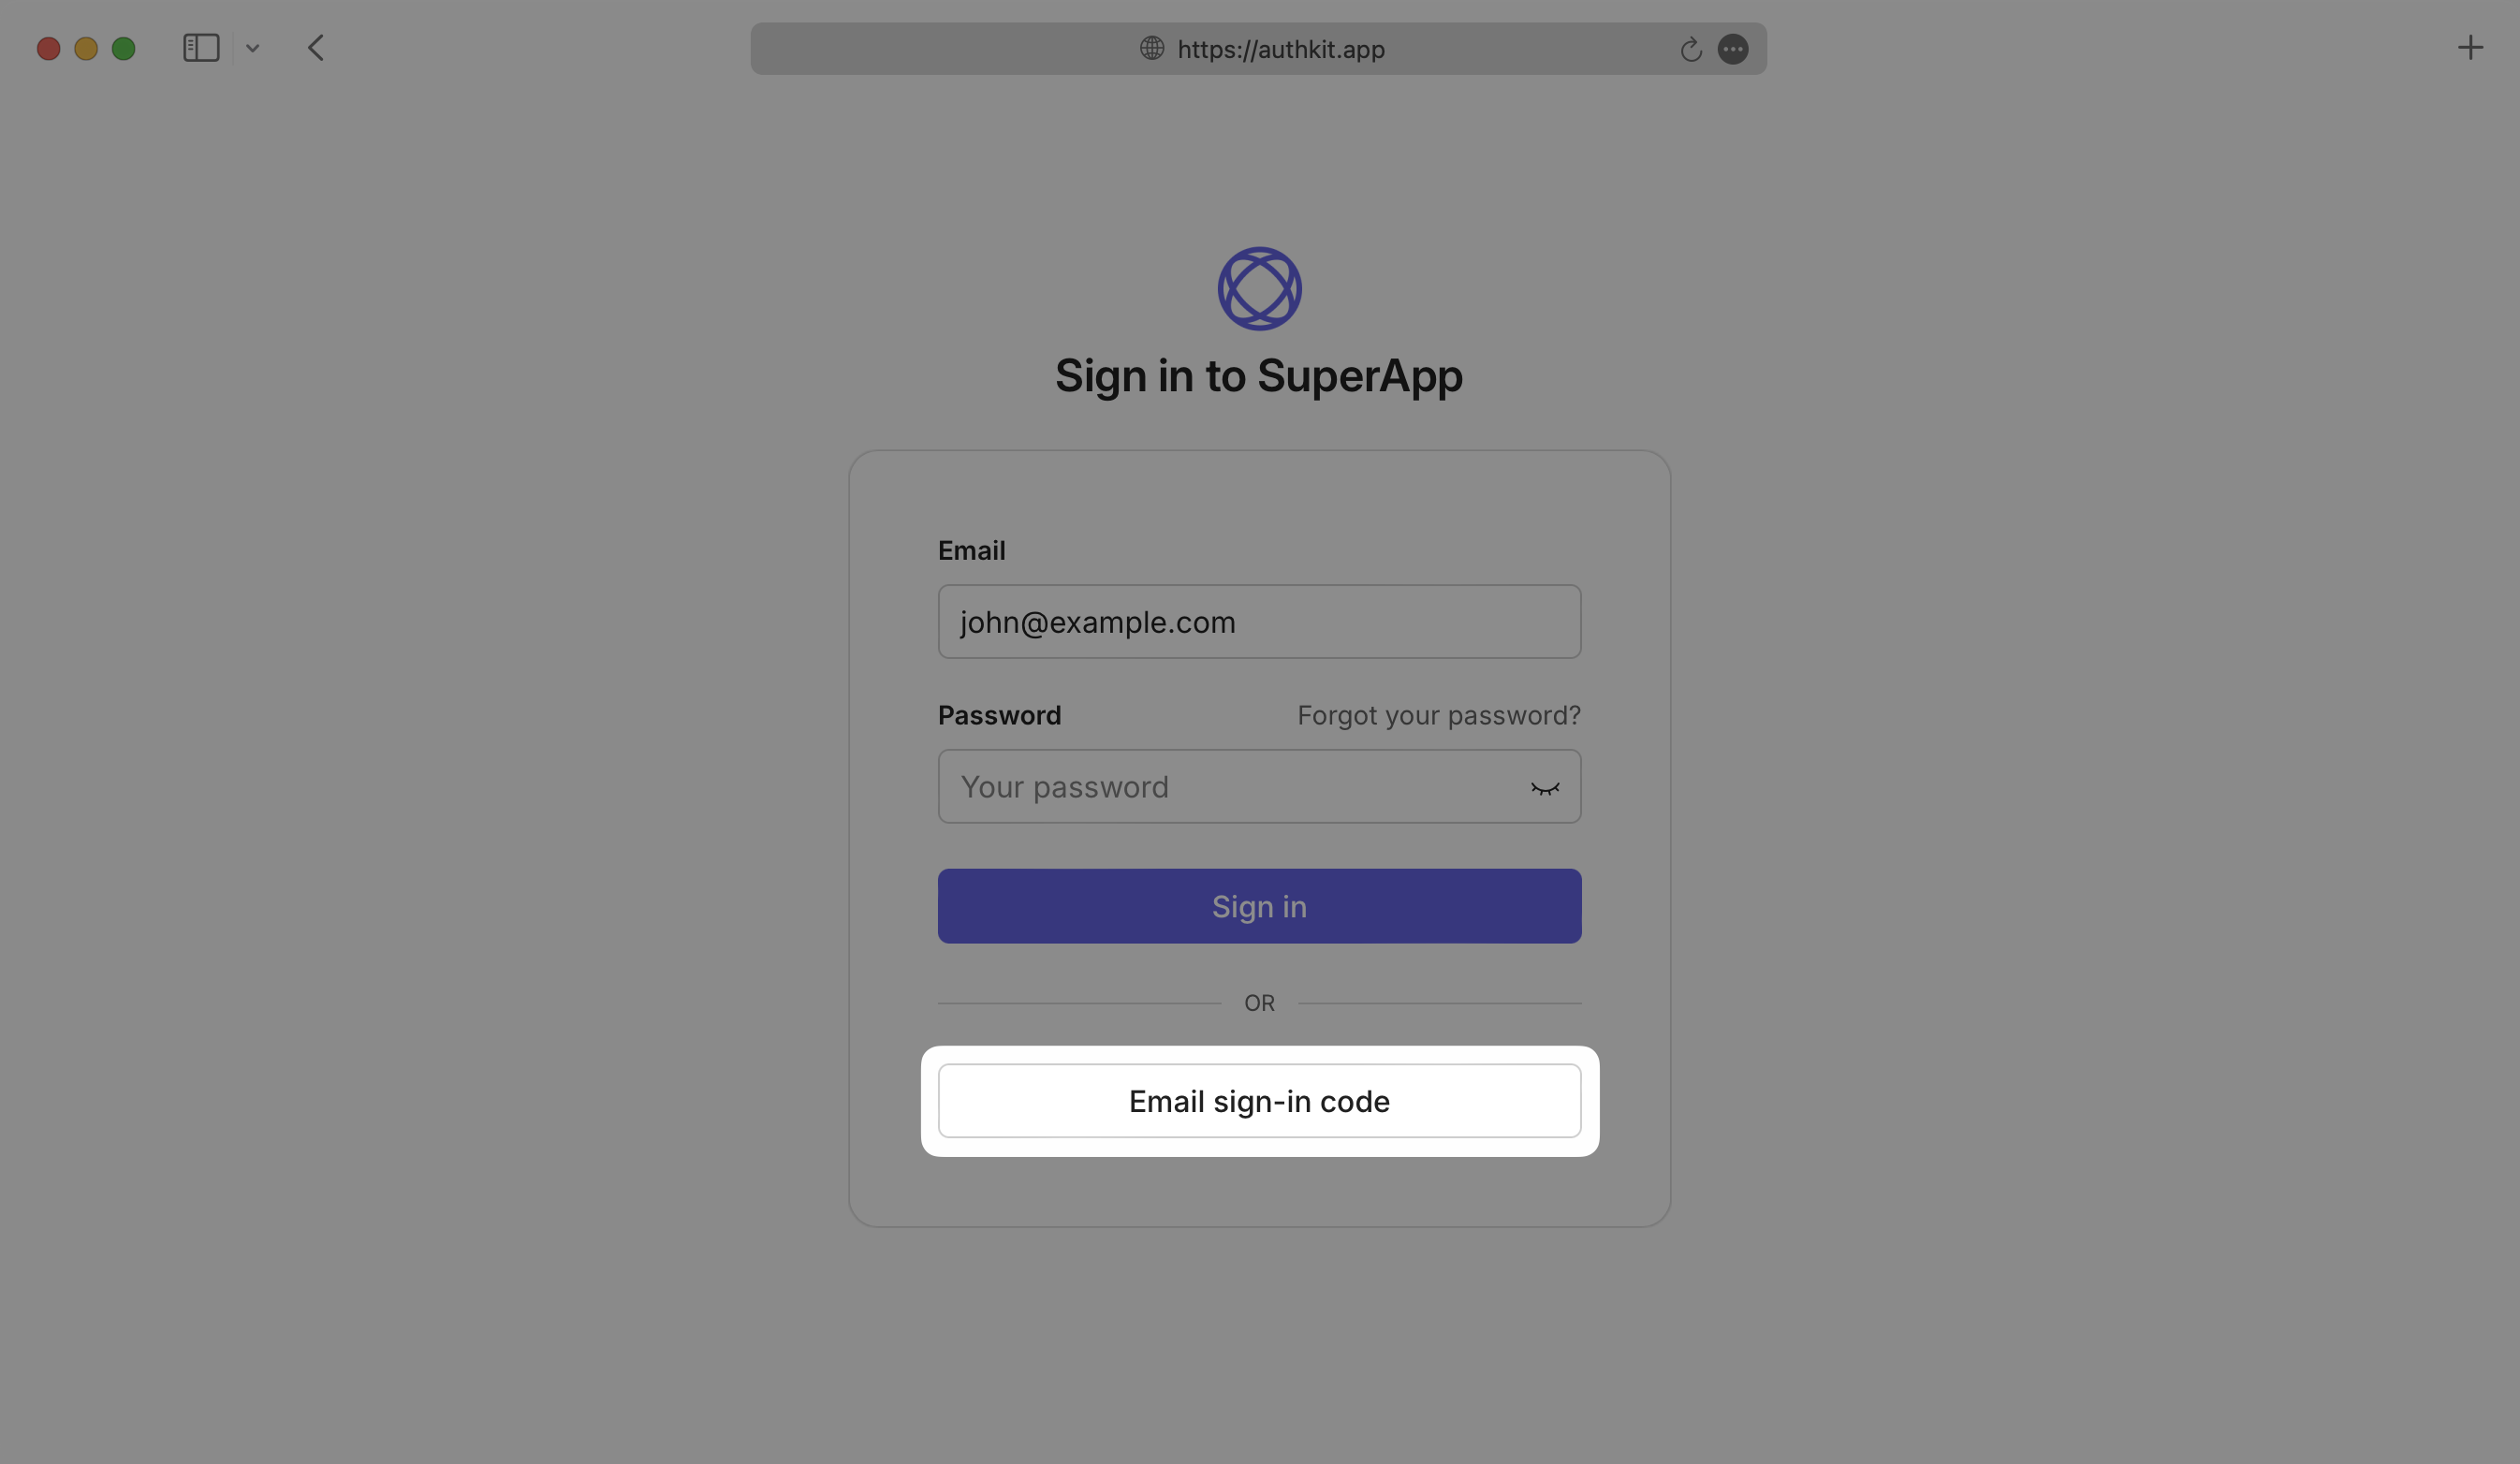 AuthKit displaying email sign-in